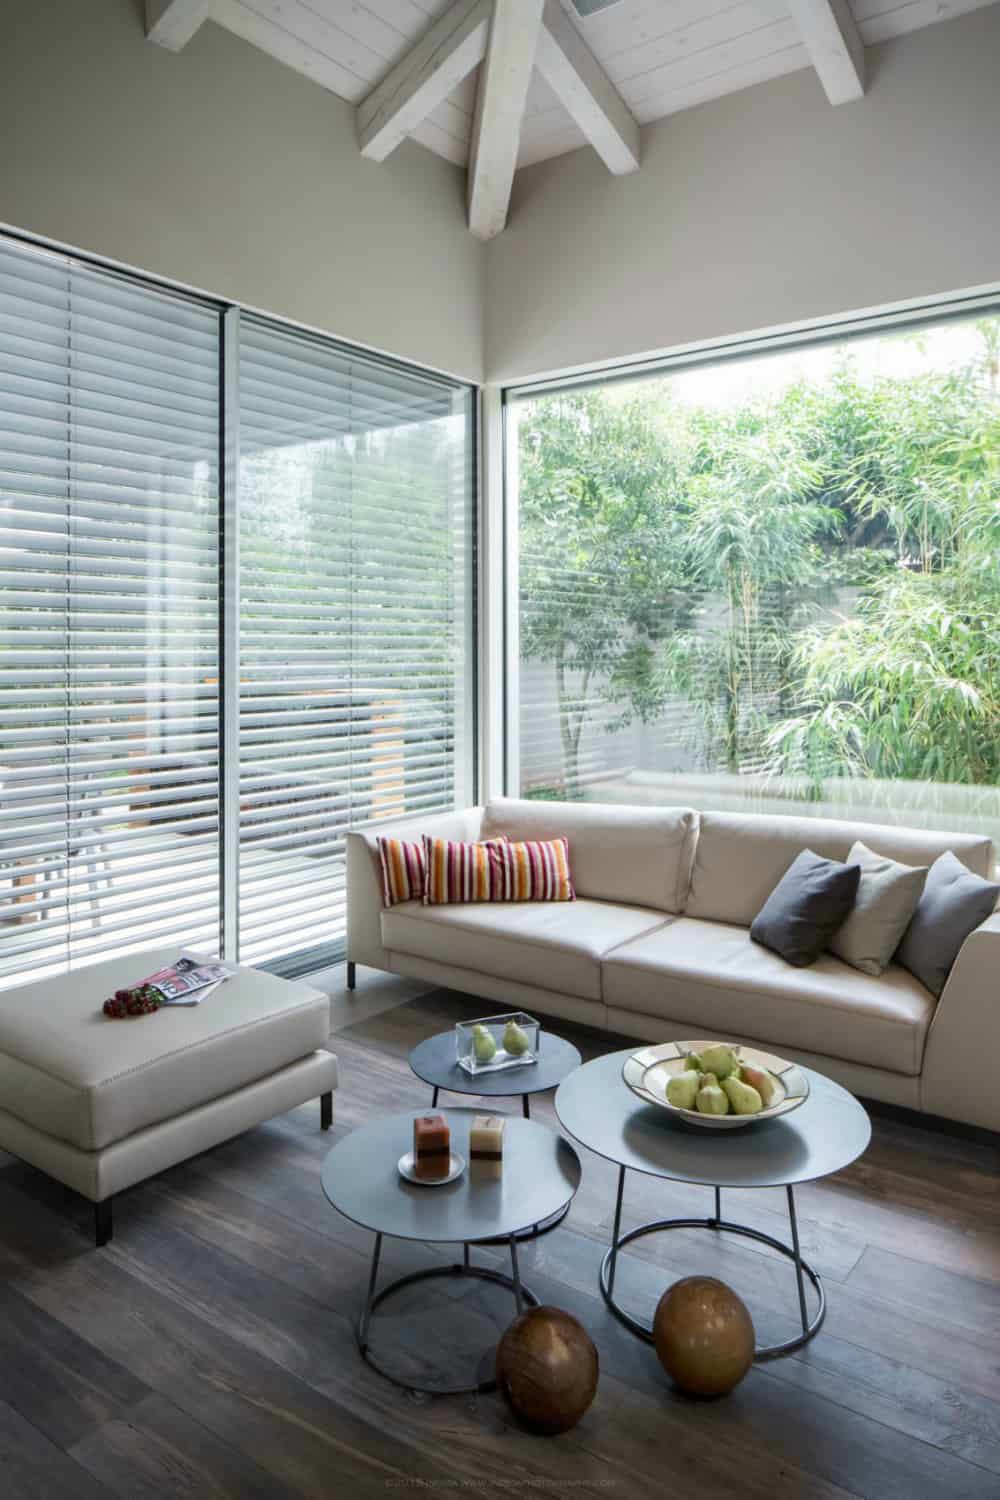 Blinds help increase privacy of the seating area